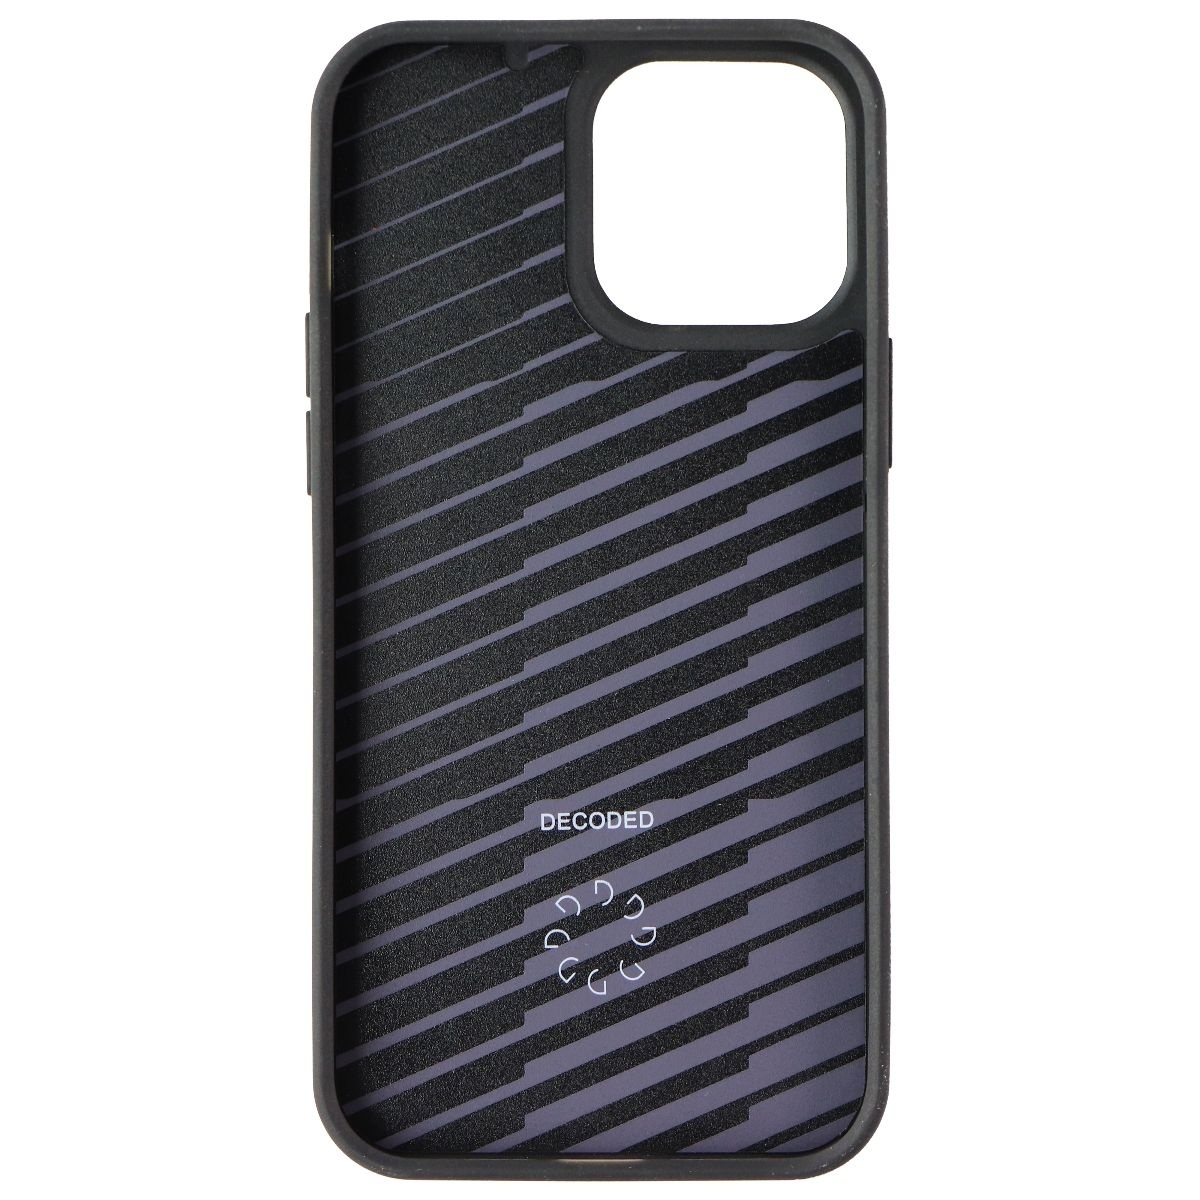 Decoded Back Cover Case Made With Nike Grind For IPhone 13 Pro Max - Black/Gray